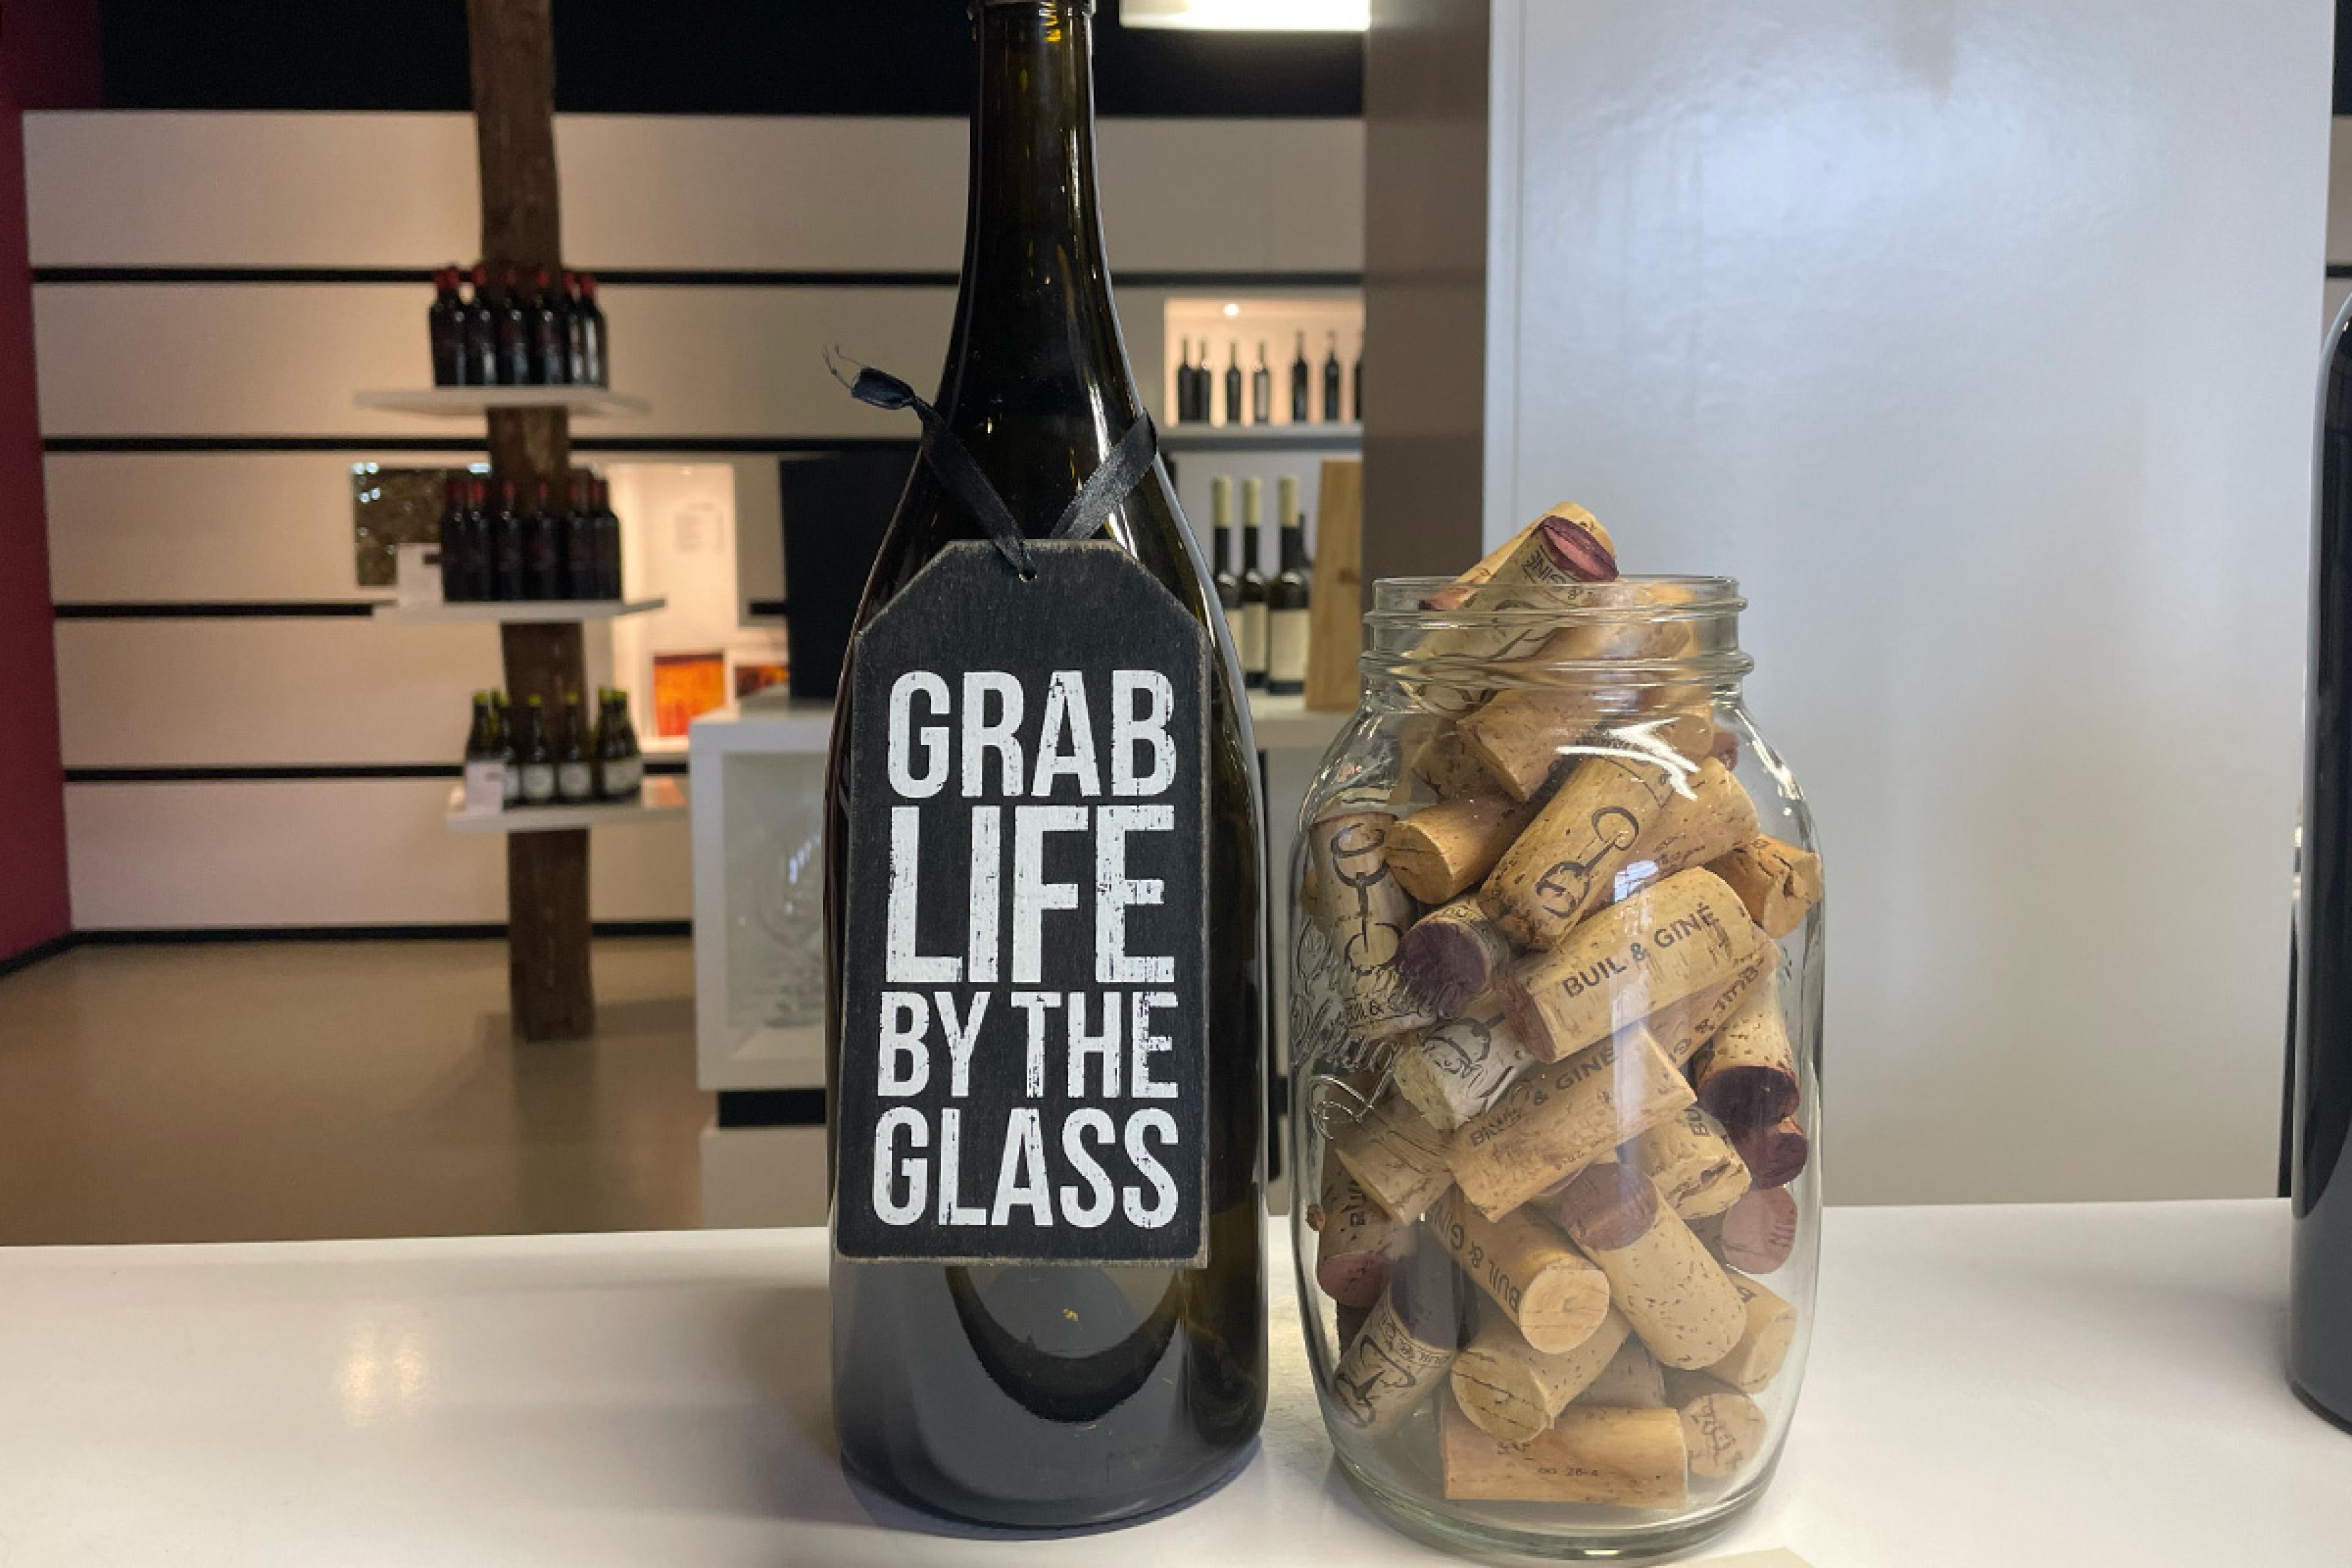 bottle of wine and jar of corks